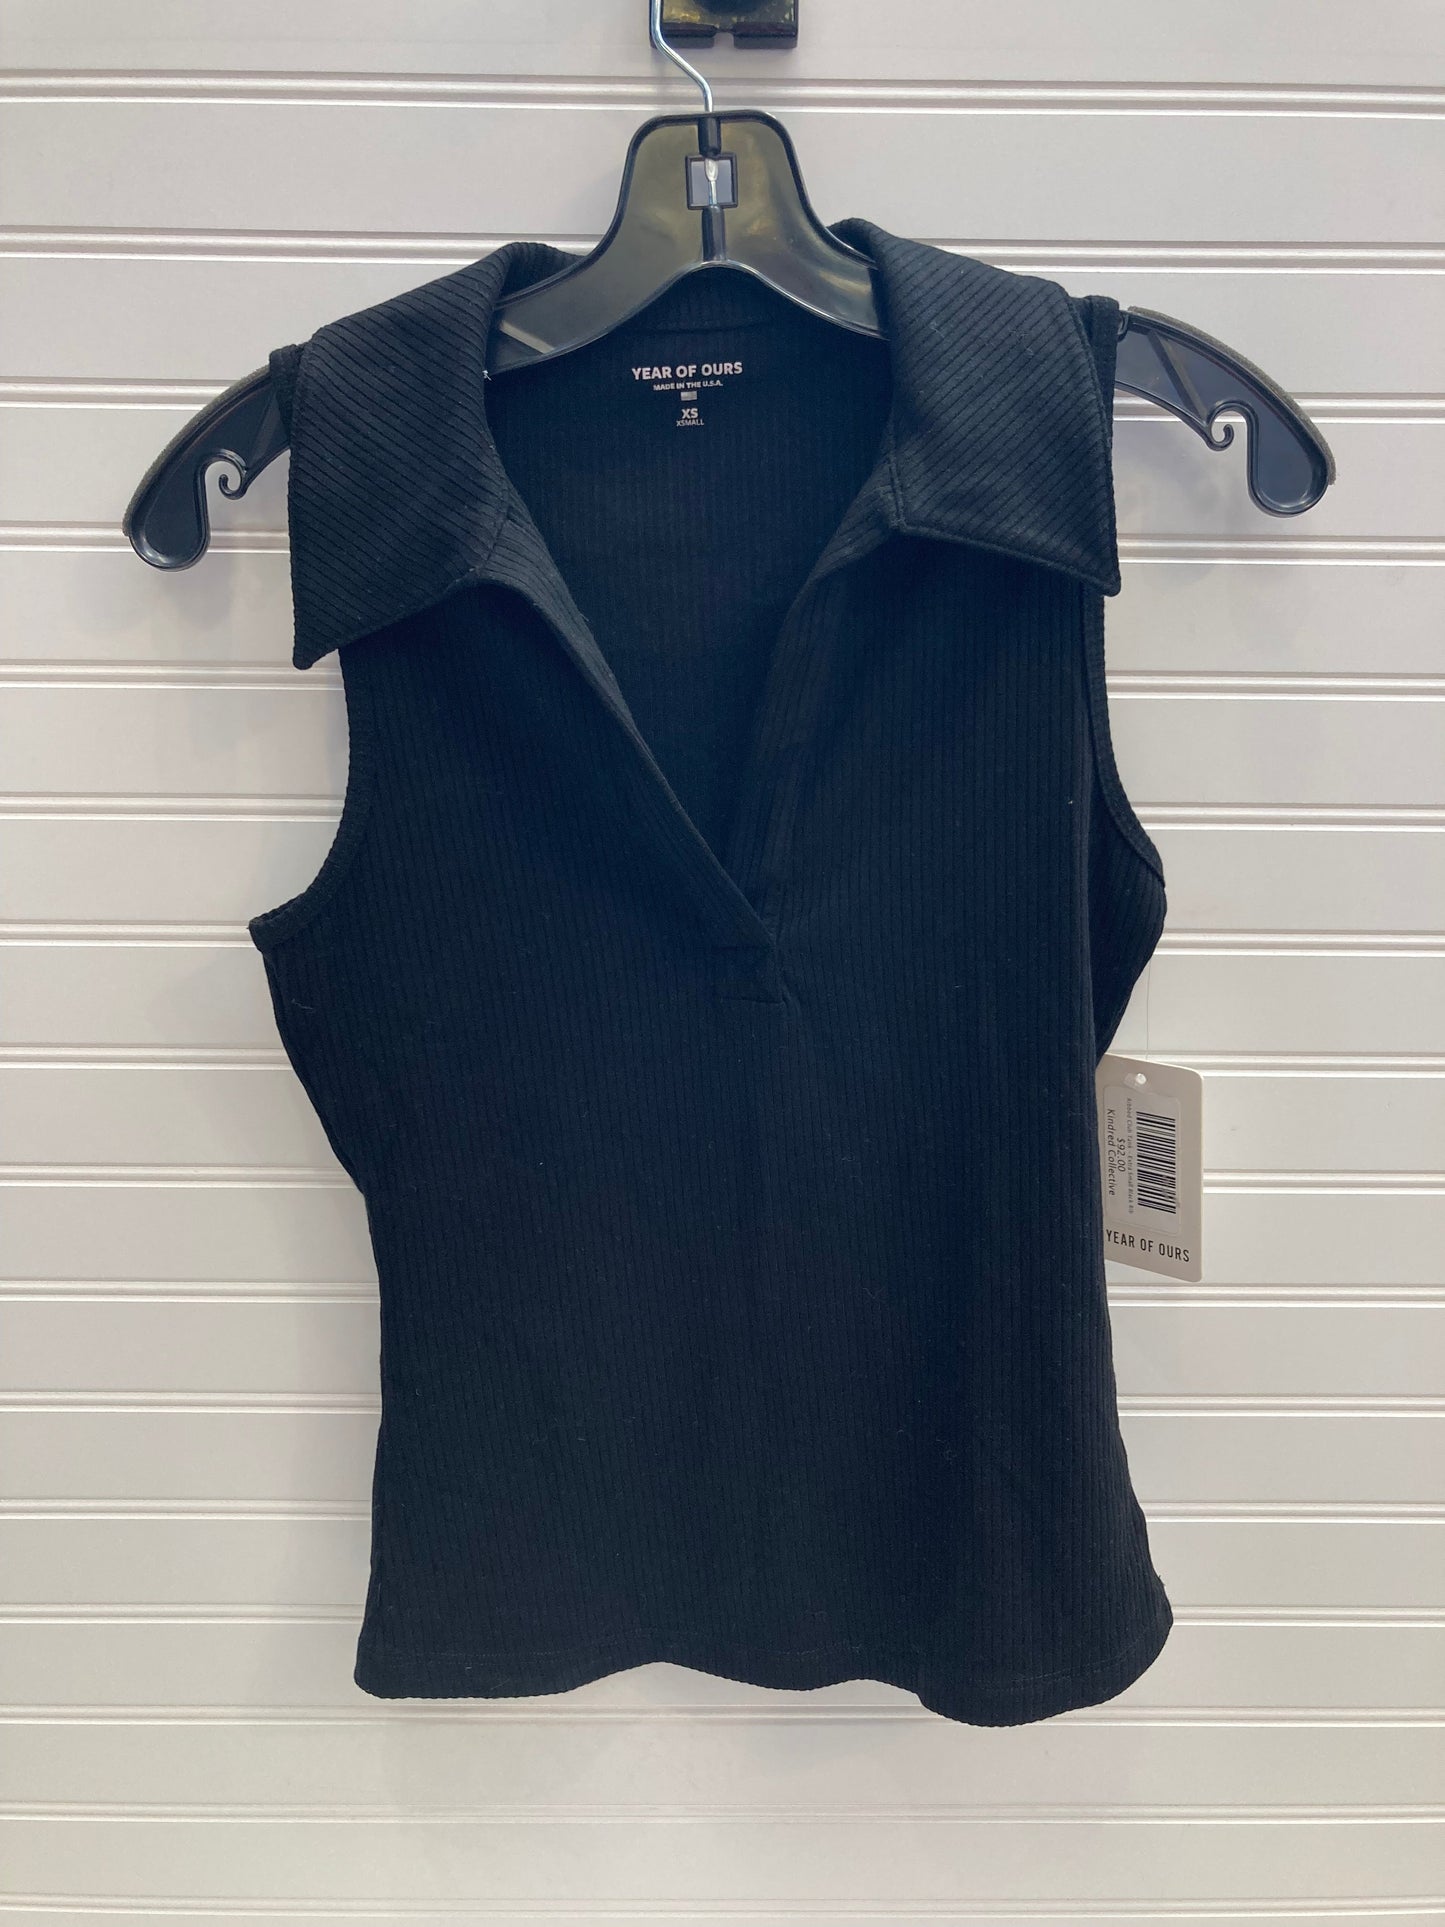 Black Top Sleeveless Year Of Ours, Size Xs